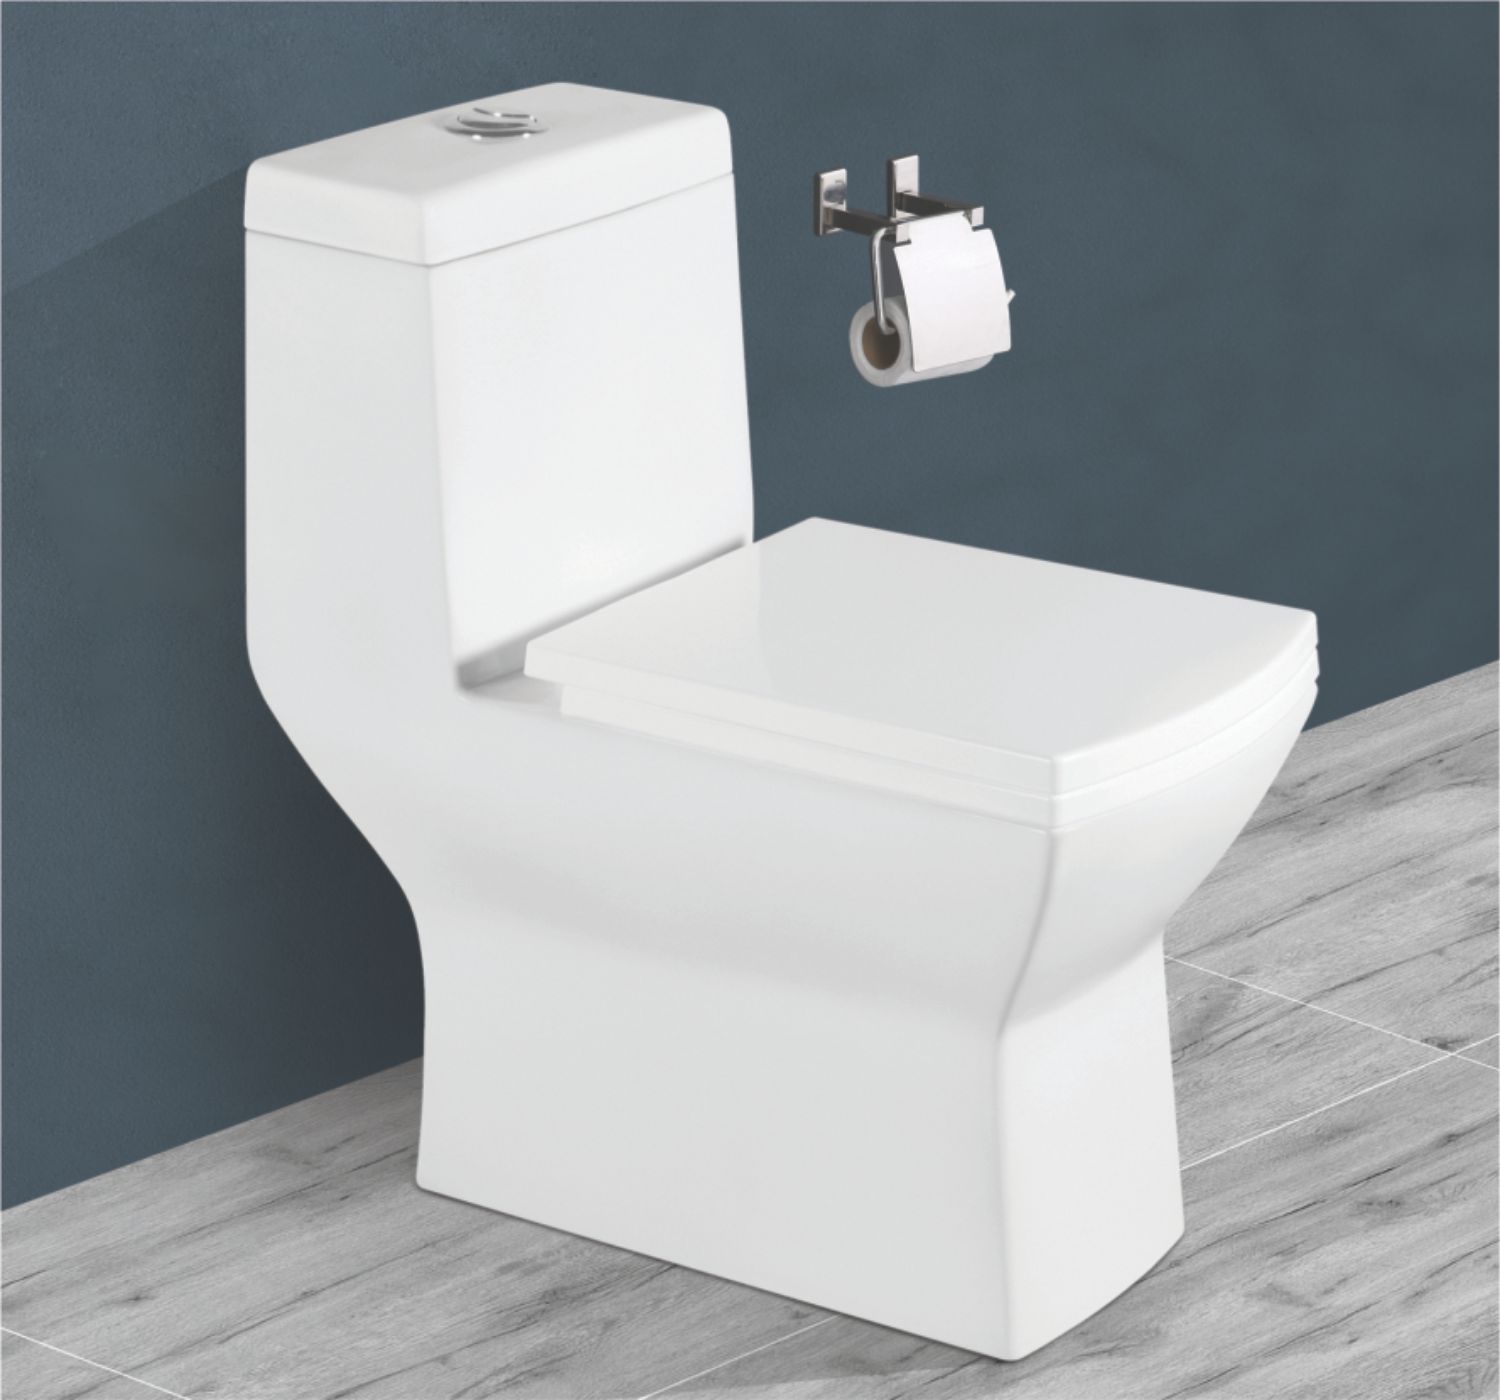 Wholesale Supplier of Ceramic One Piece Water Closet